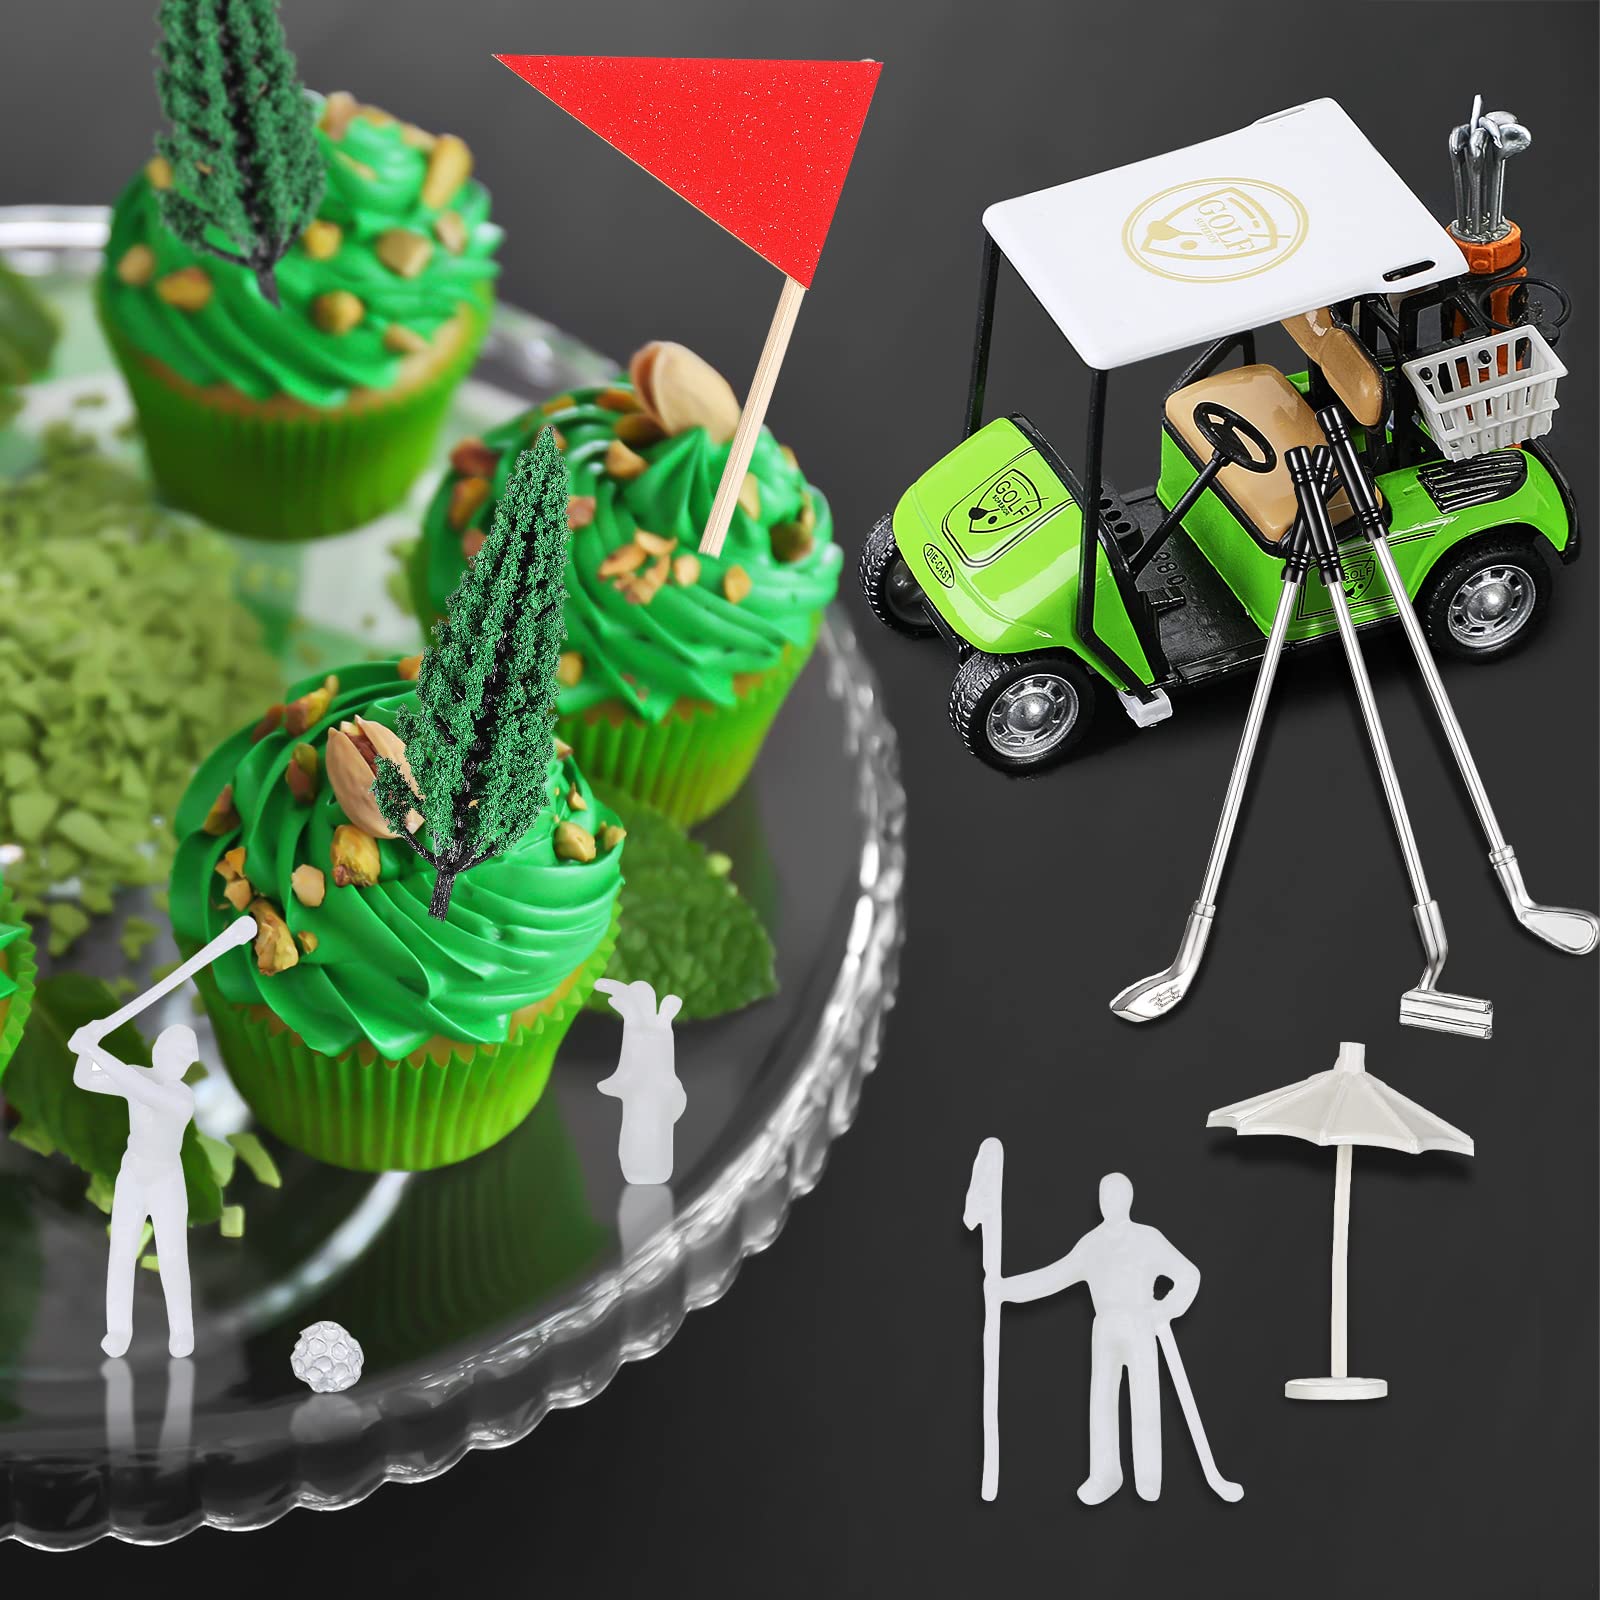 Moxweyeni 21 Pieces Golf Cake Decorations, Birthday Cake Toppers Mini Golf Cart Toy for Sport Themed Boy Girl Birthday Party Supplies